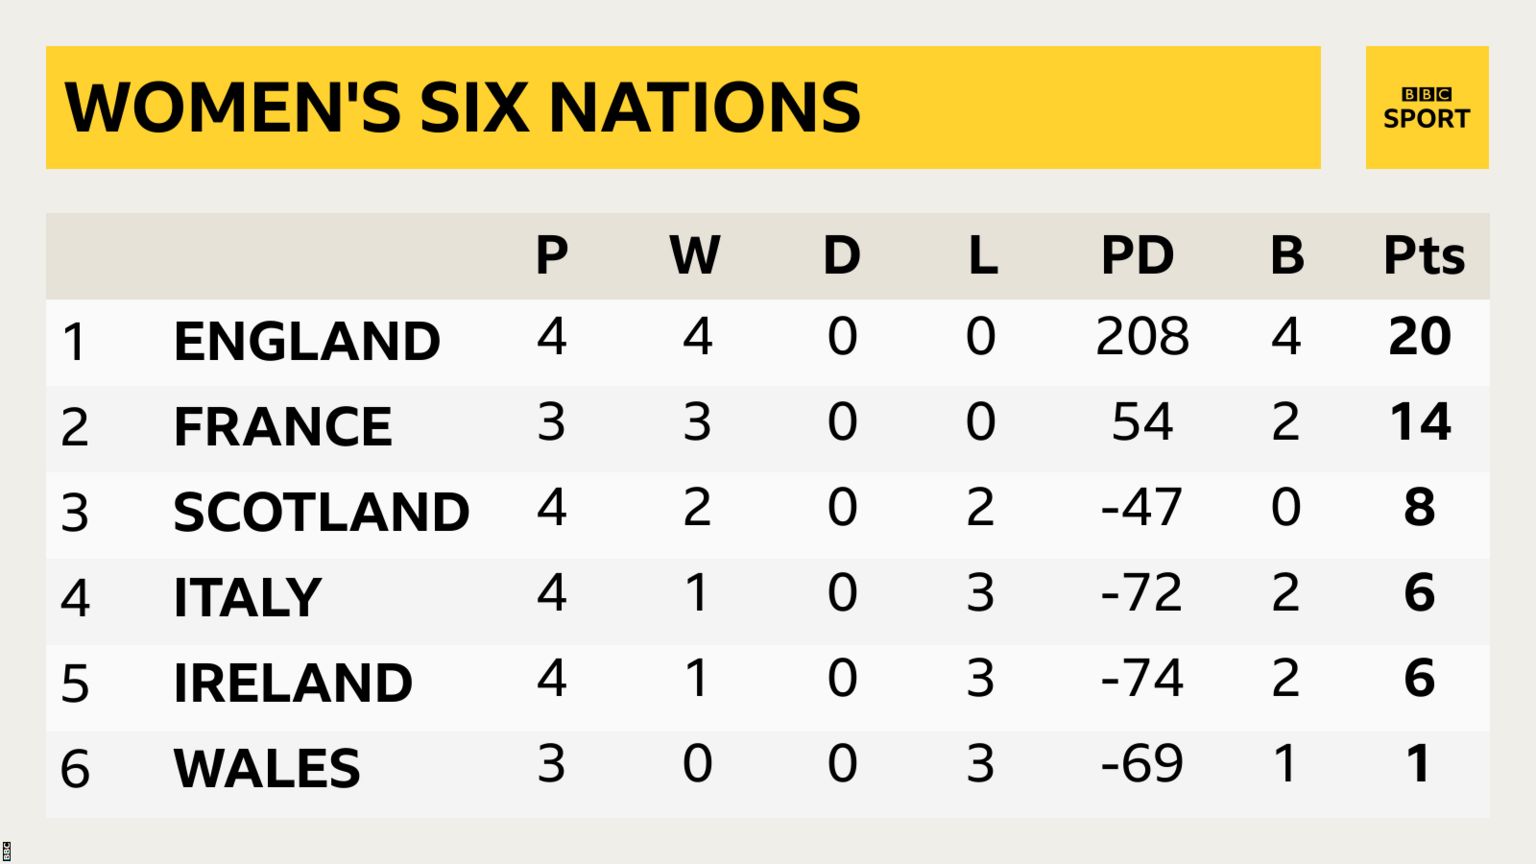 England lead the Women's Six Nations table after four bonus point wins, while France are second, Scotland third, Italy fourth, Ireland fifth and Wales sixth